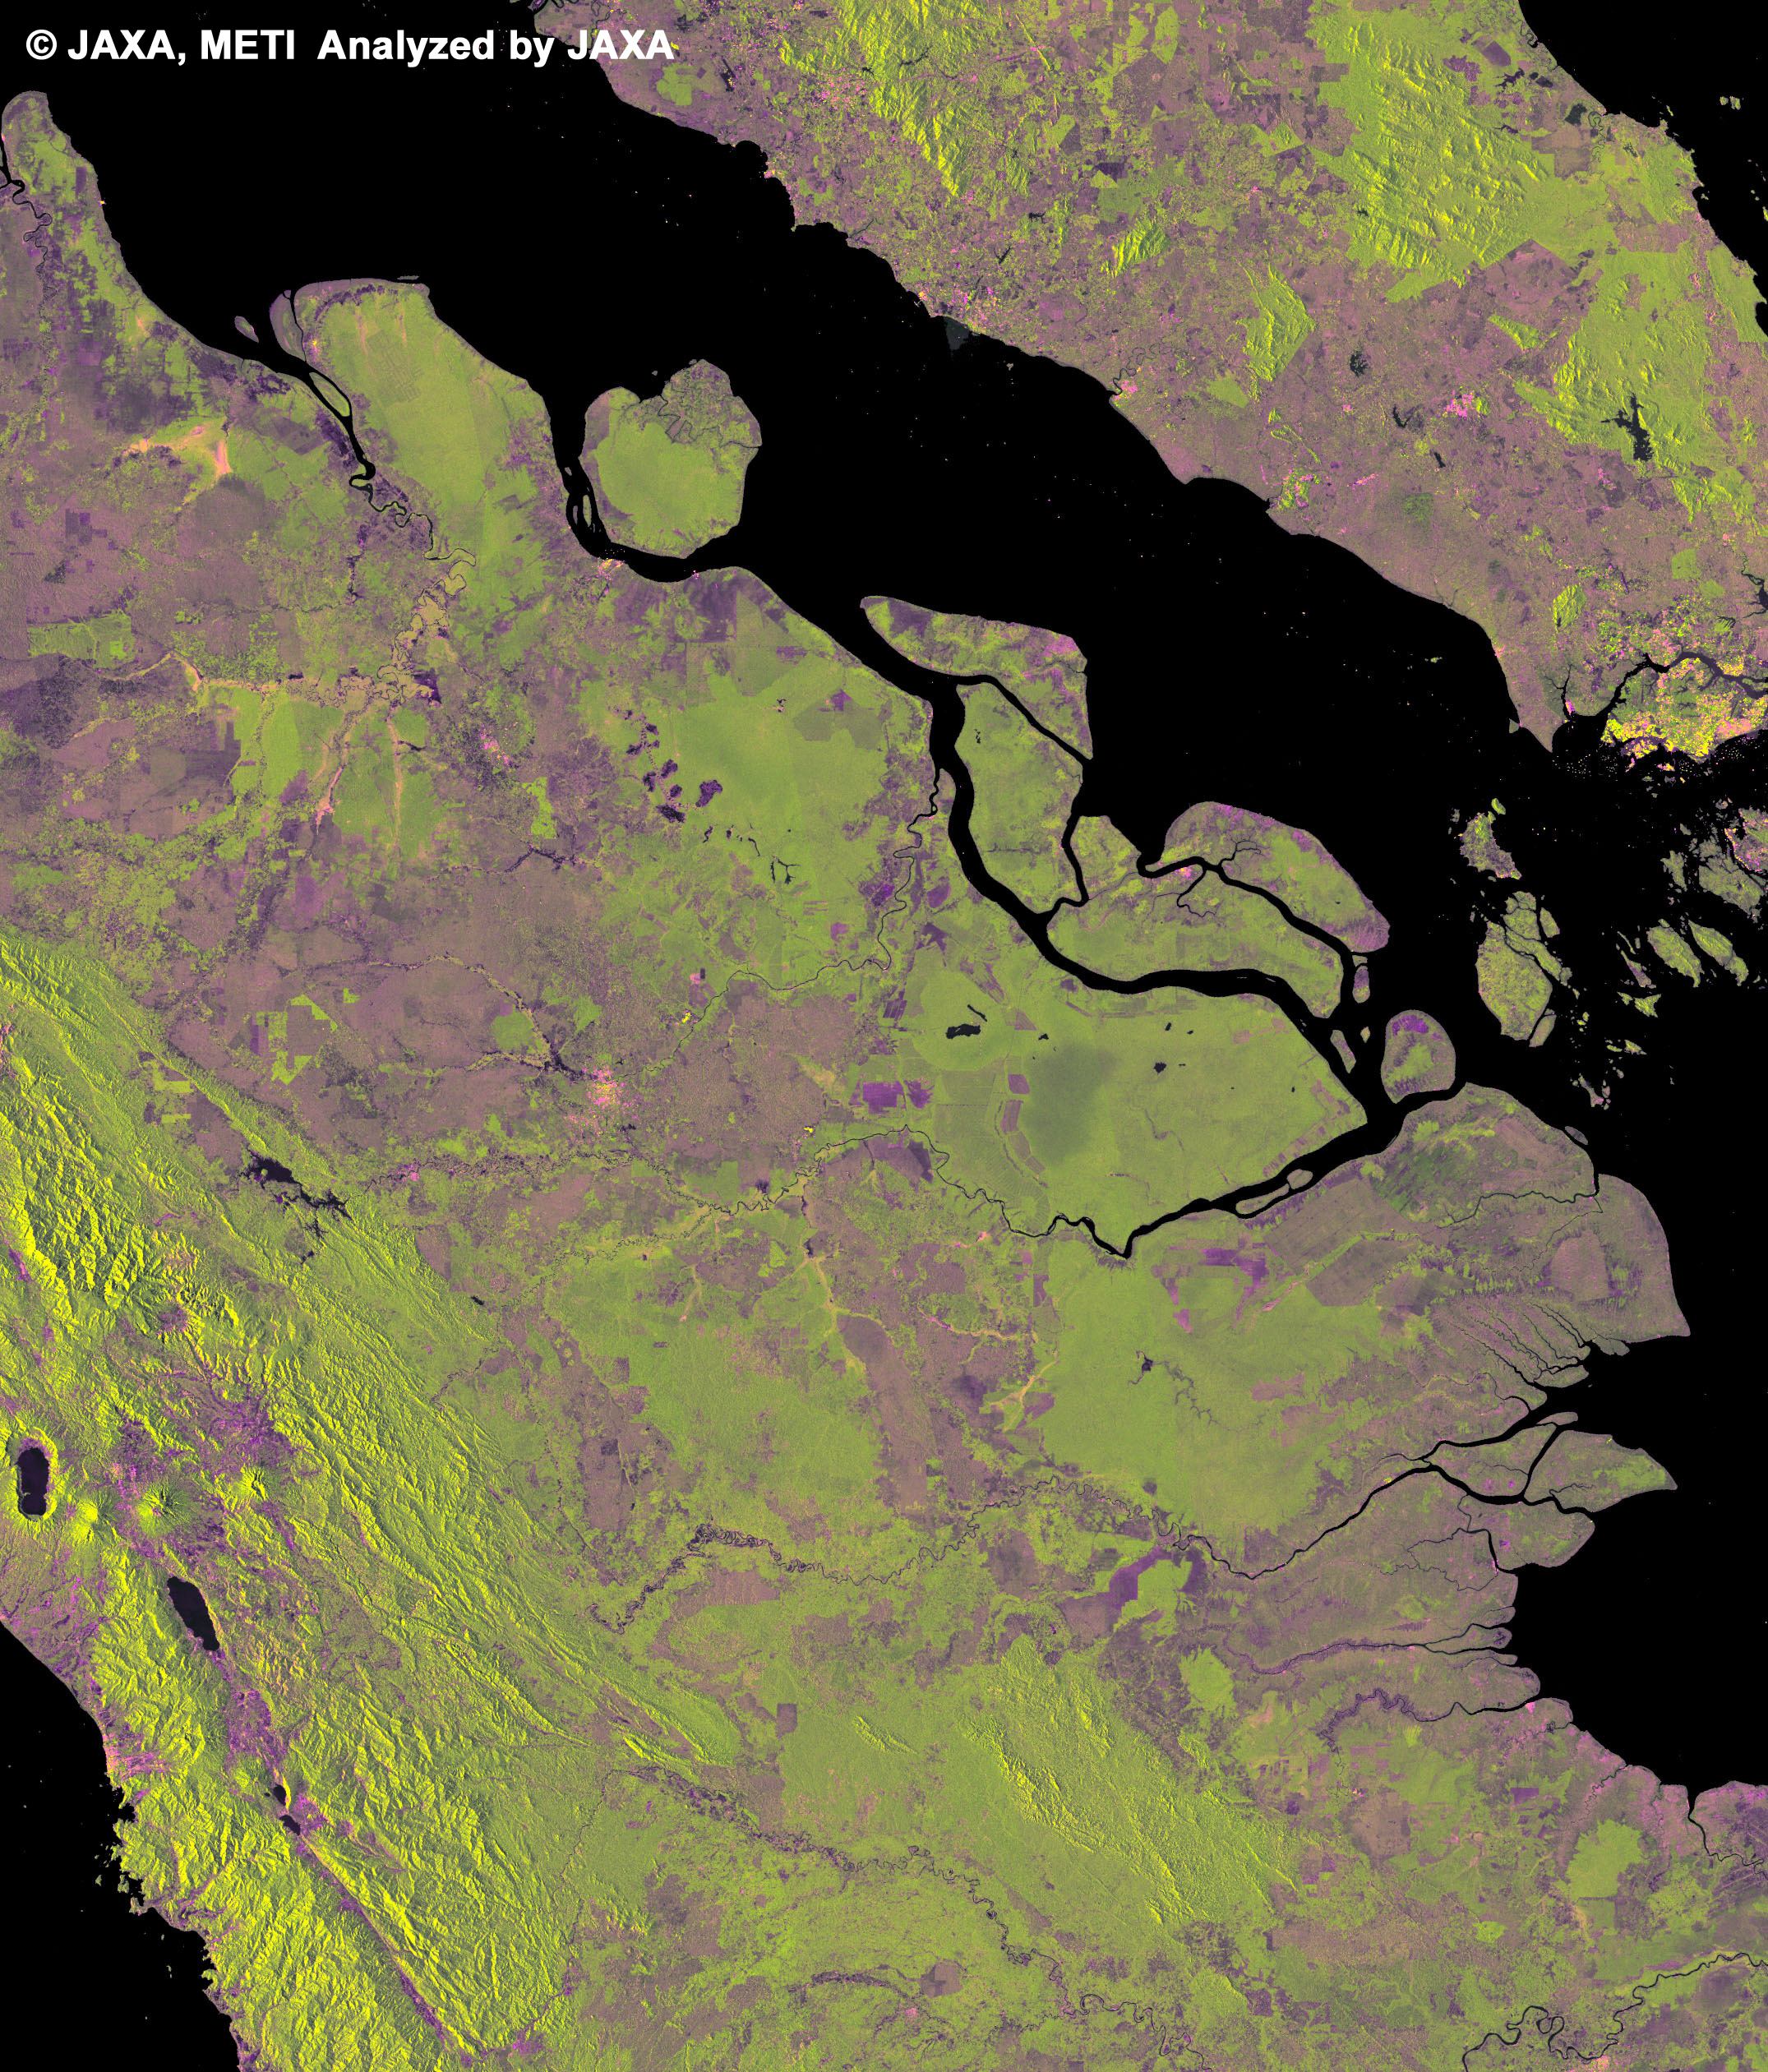 Fig. 2 Expanded image of riau province in eastern Sumatra.